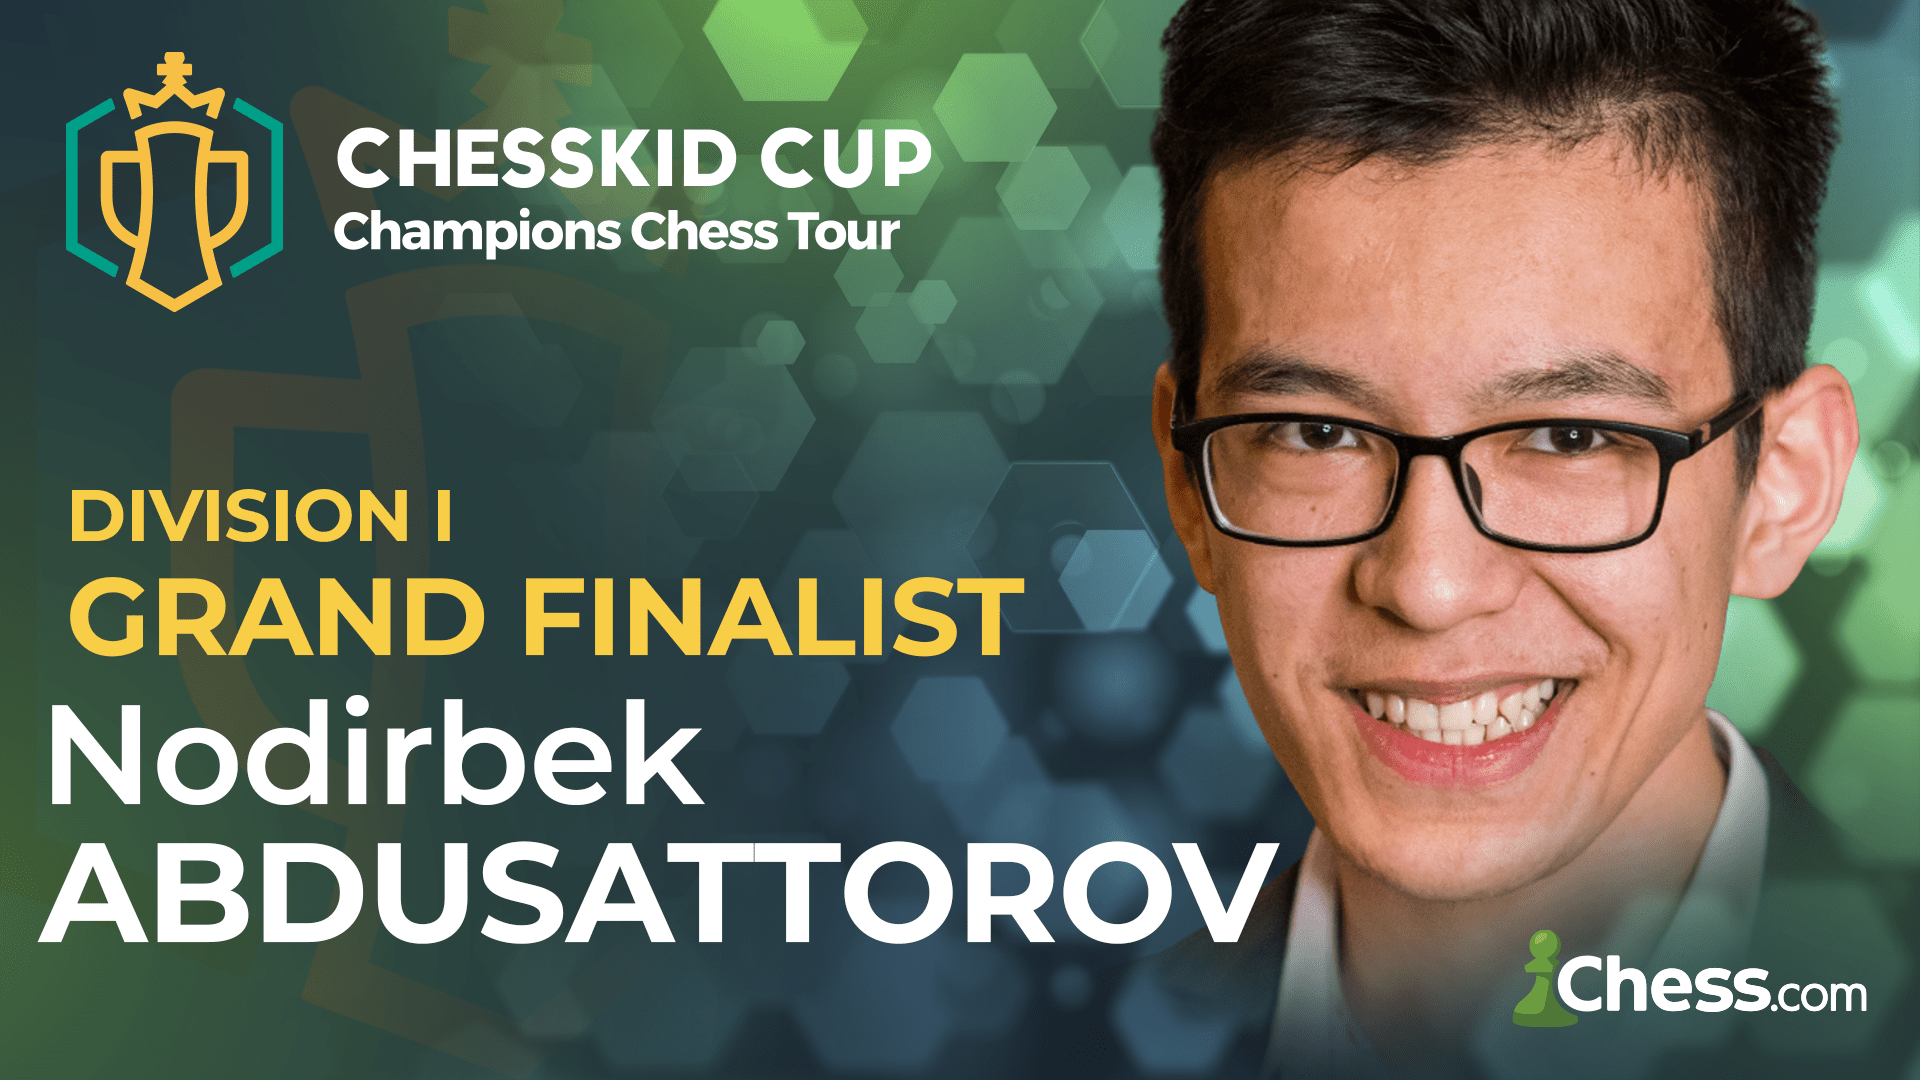 Abdusattorov Advances To Grand Final; Caruana, Moussard To Play In Losers Final